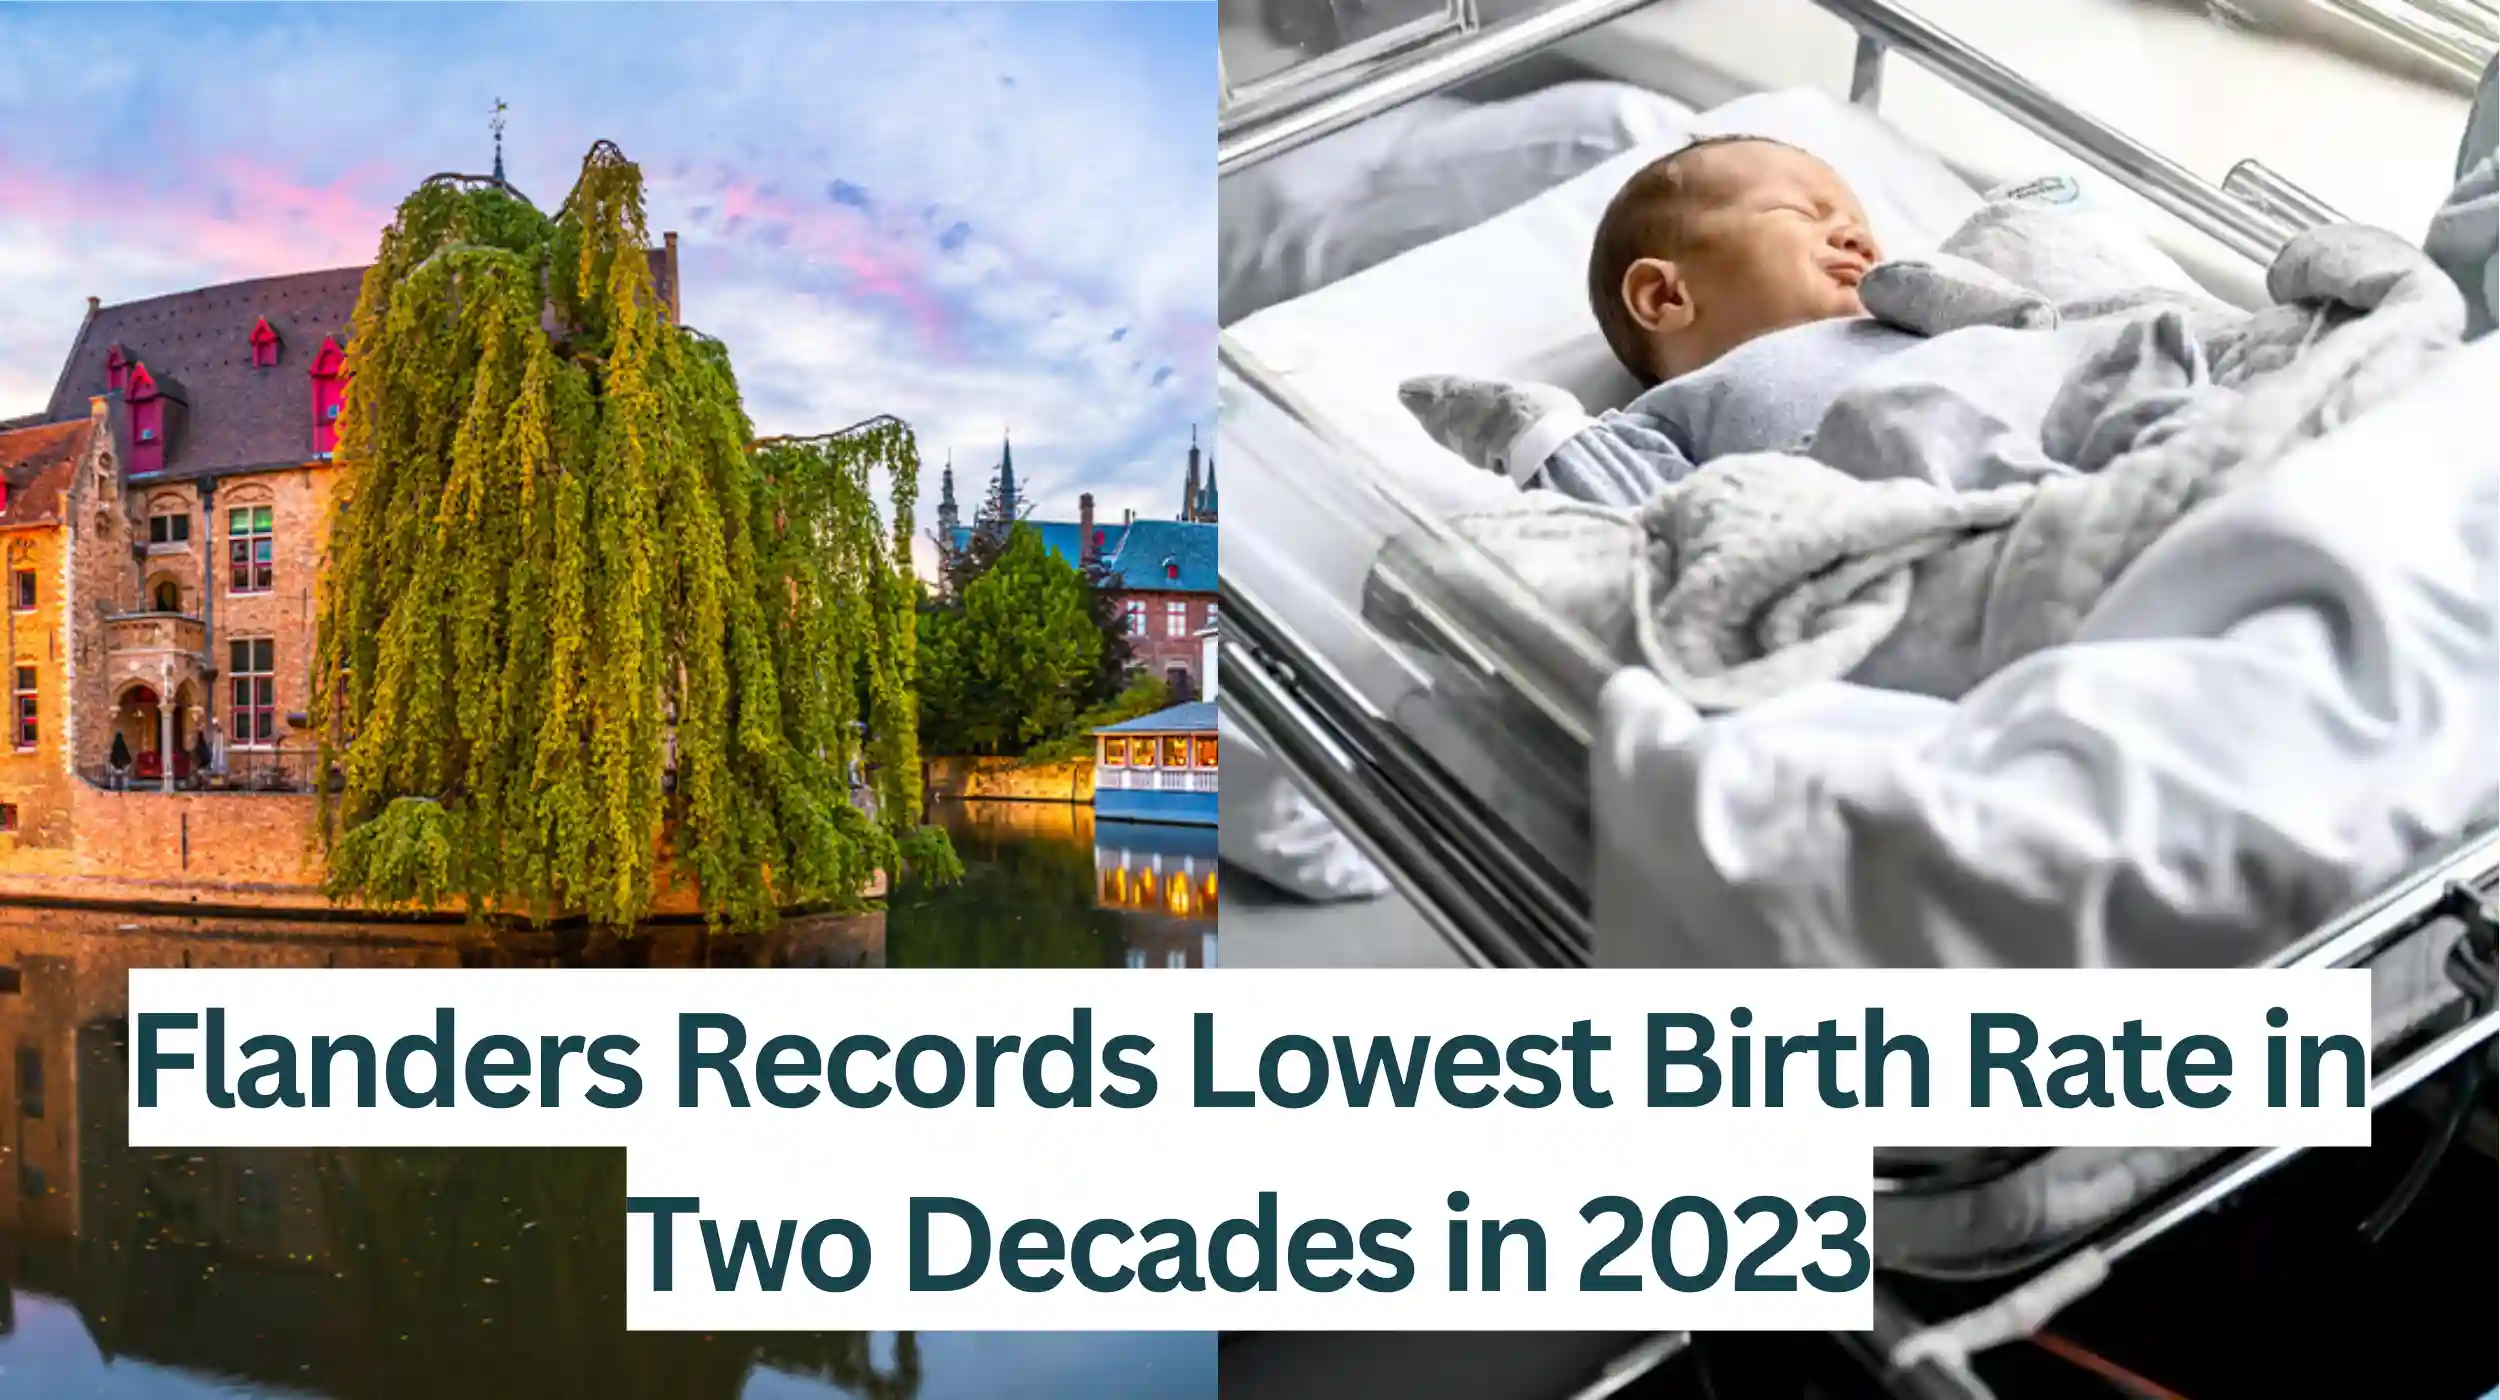 Flanders-Records-Lowest-Birth-Rate-in-Two-Decades-in-2023